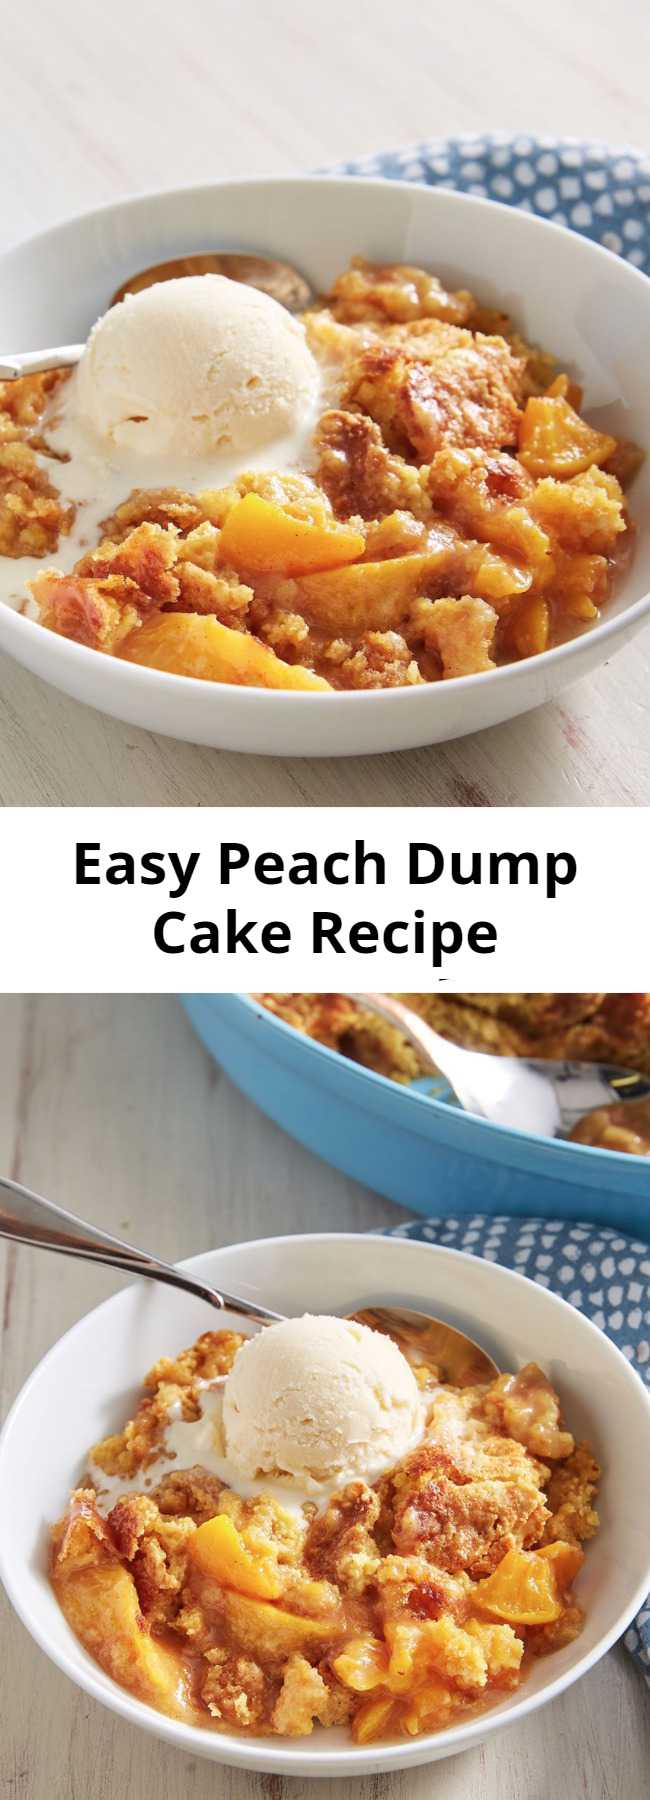 Easy Peach Dump Cake Recipe - Peach Dump Cake is as easy as can be with less than 10 minutes of hands-on time.